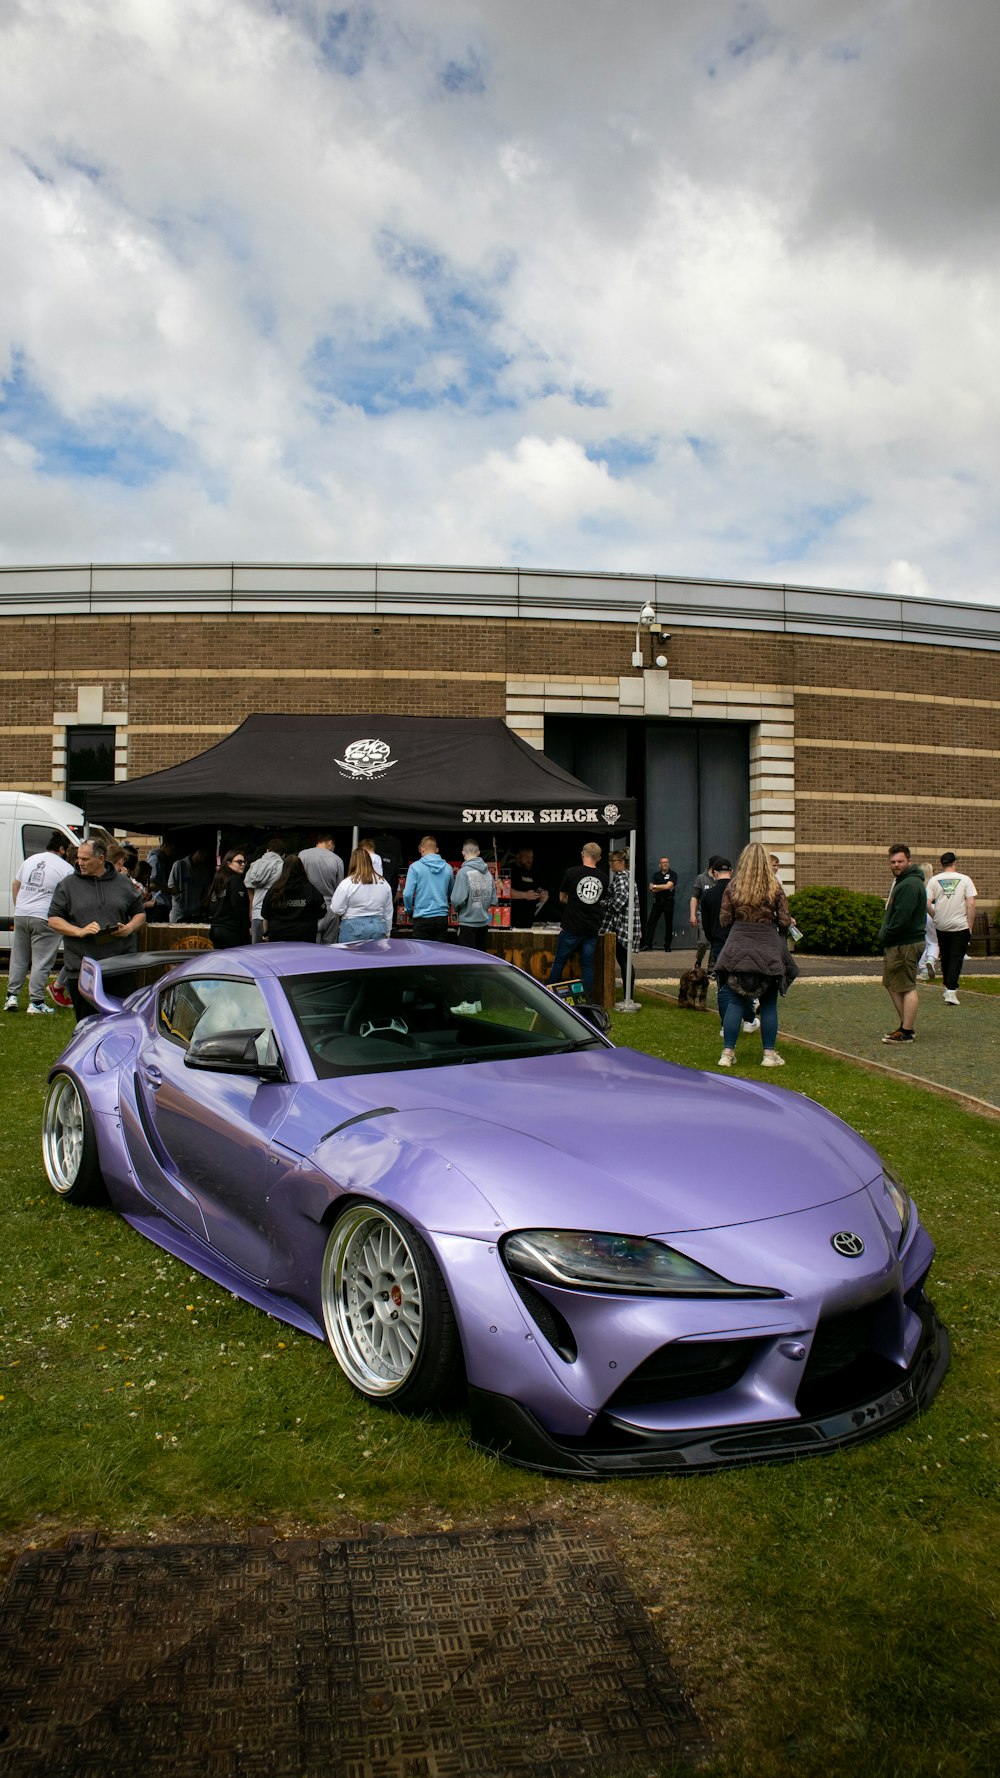 a purple sports car parked in front of a building